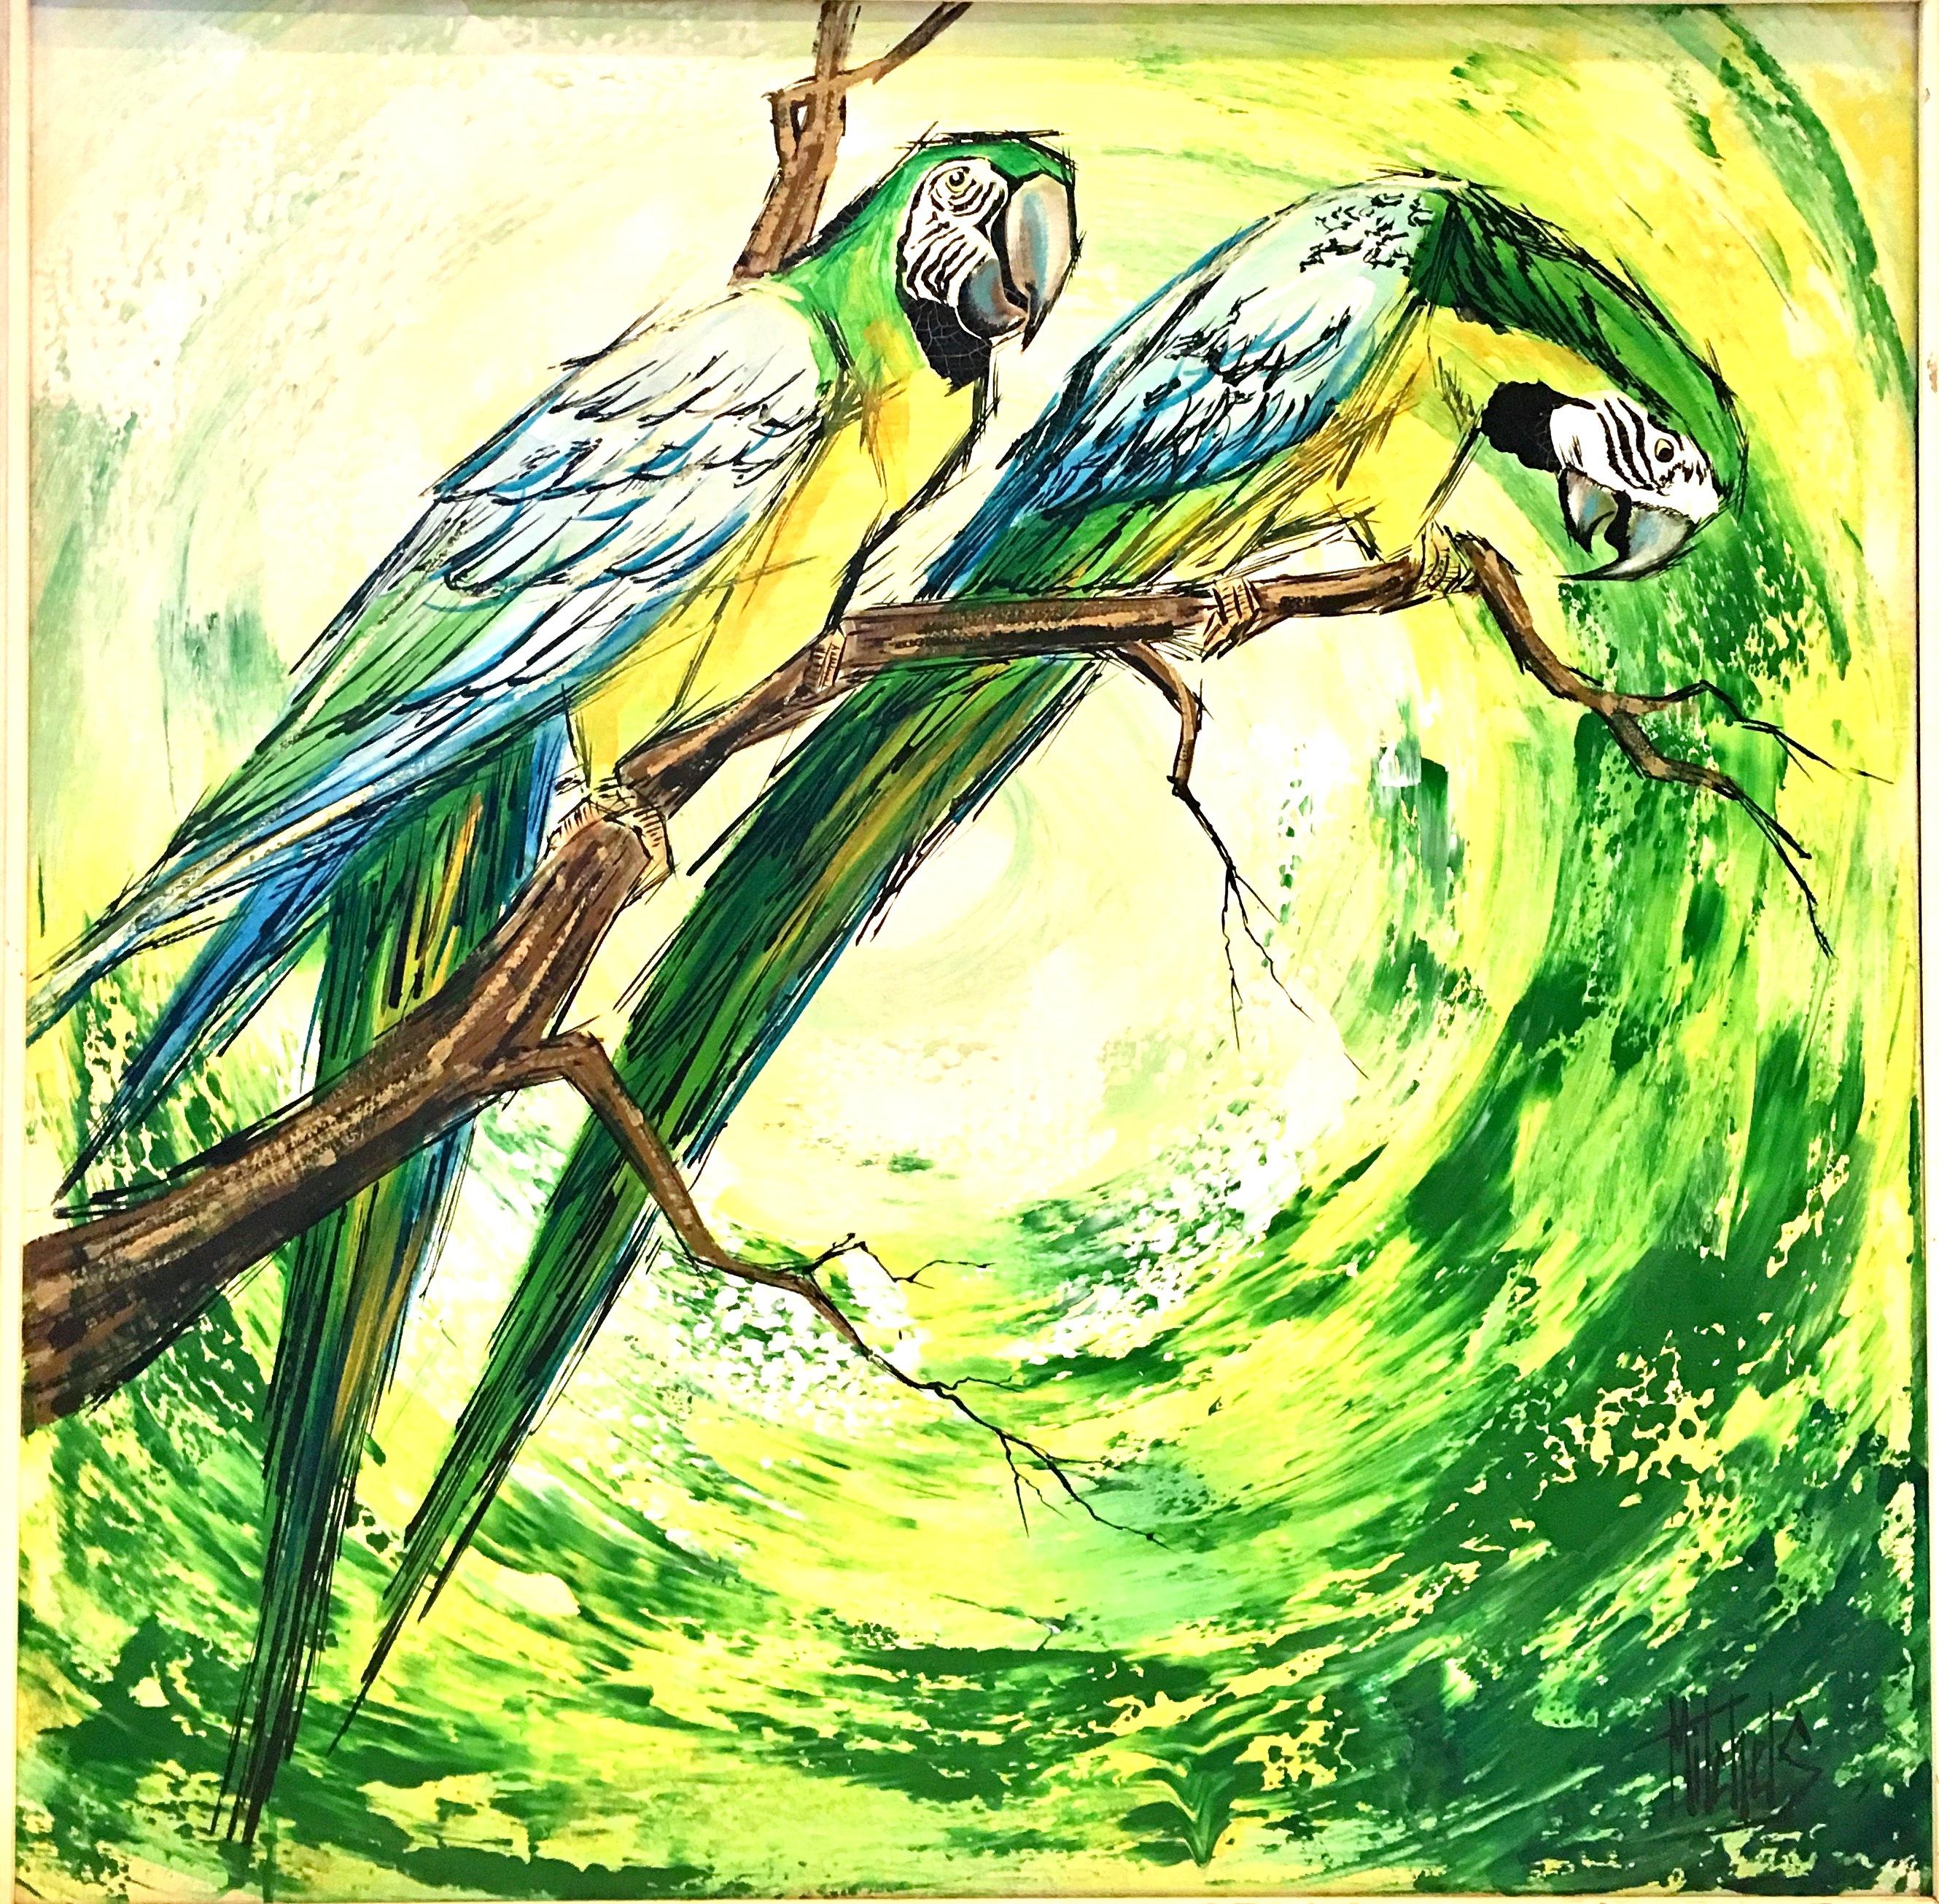 20th century original oil on canvas, bright and cheery painting by, Mitchels. Features a pair of birds perched on a branch. Finished in shades of bright green, blue, yellow, black, white and brown. The frame is dark painted wood. Artist signed lower